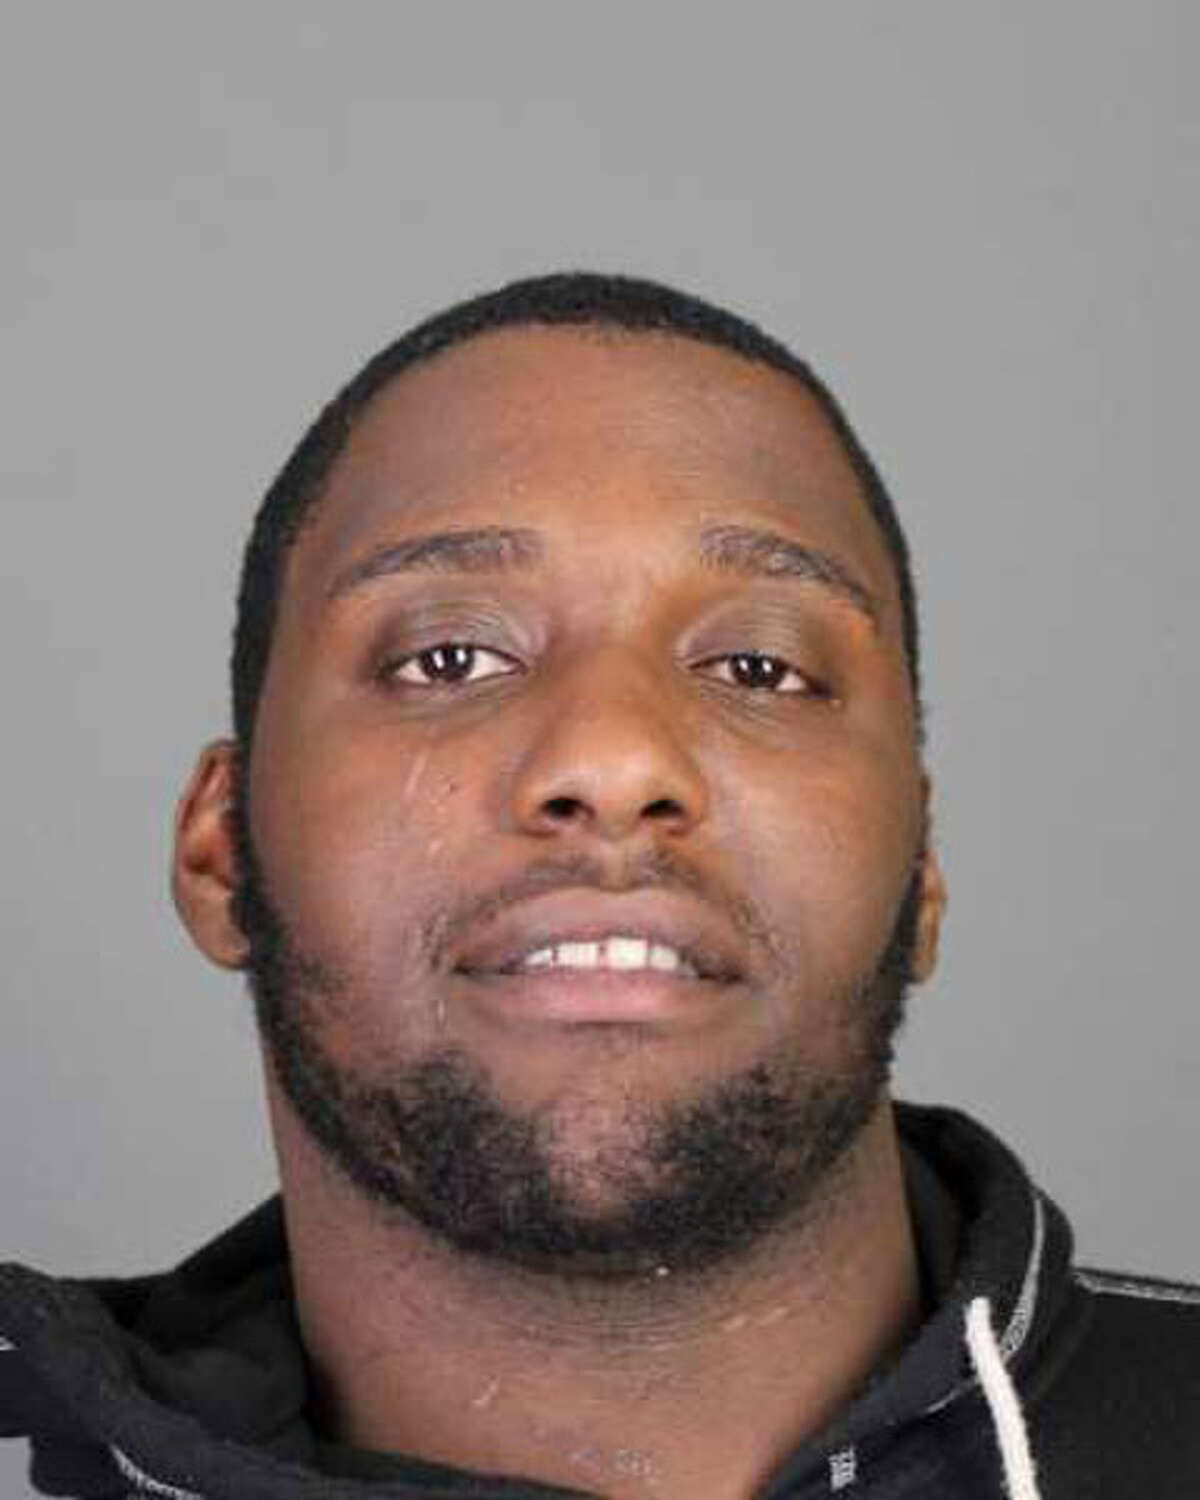 Lahquann Grady, 21, faces charges in connection with the killing last week of Rashaun Byrd, a 29-year-old Albany resident. (Albany Police Department)